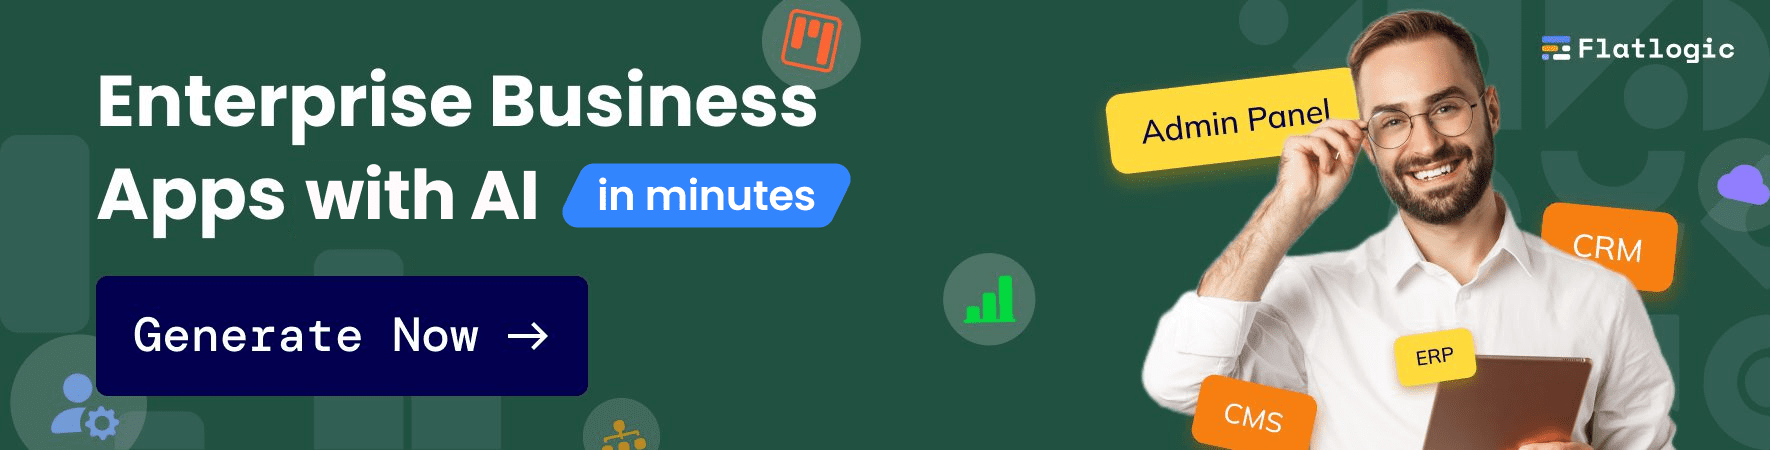 Enterprise Business Apps with AI in minutes. Generate app!